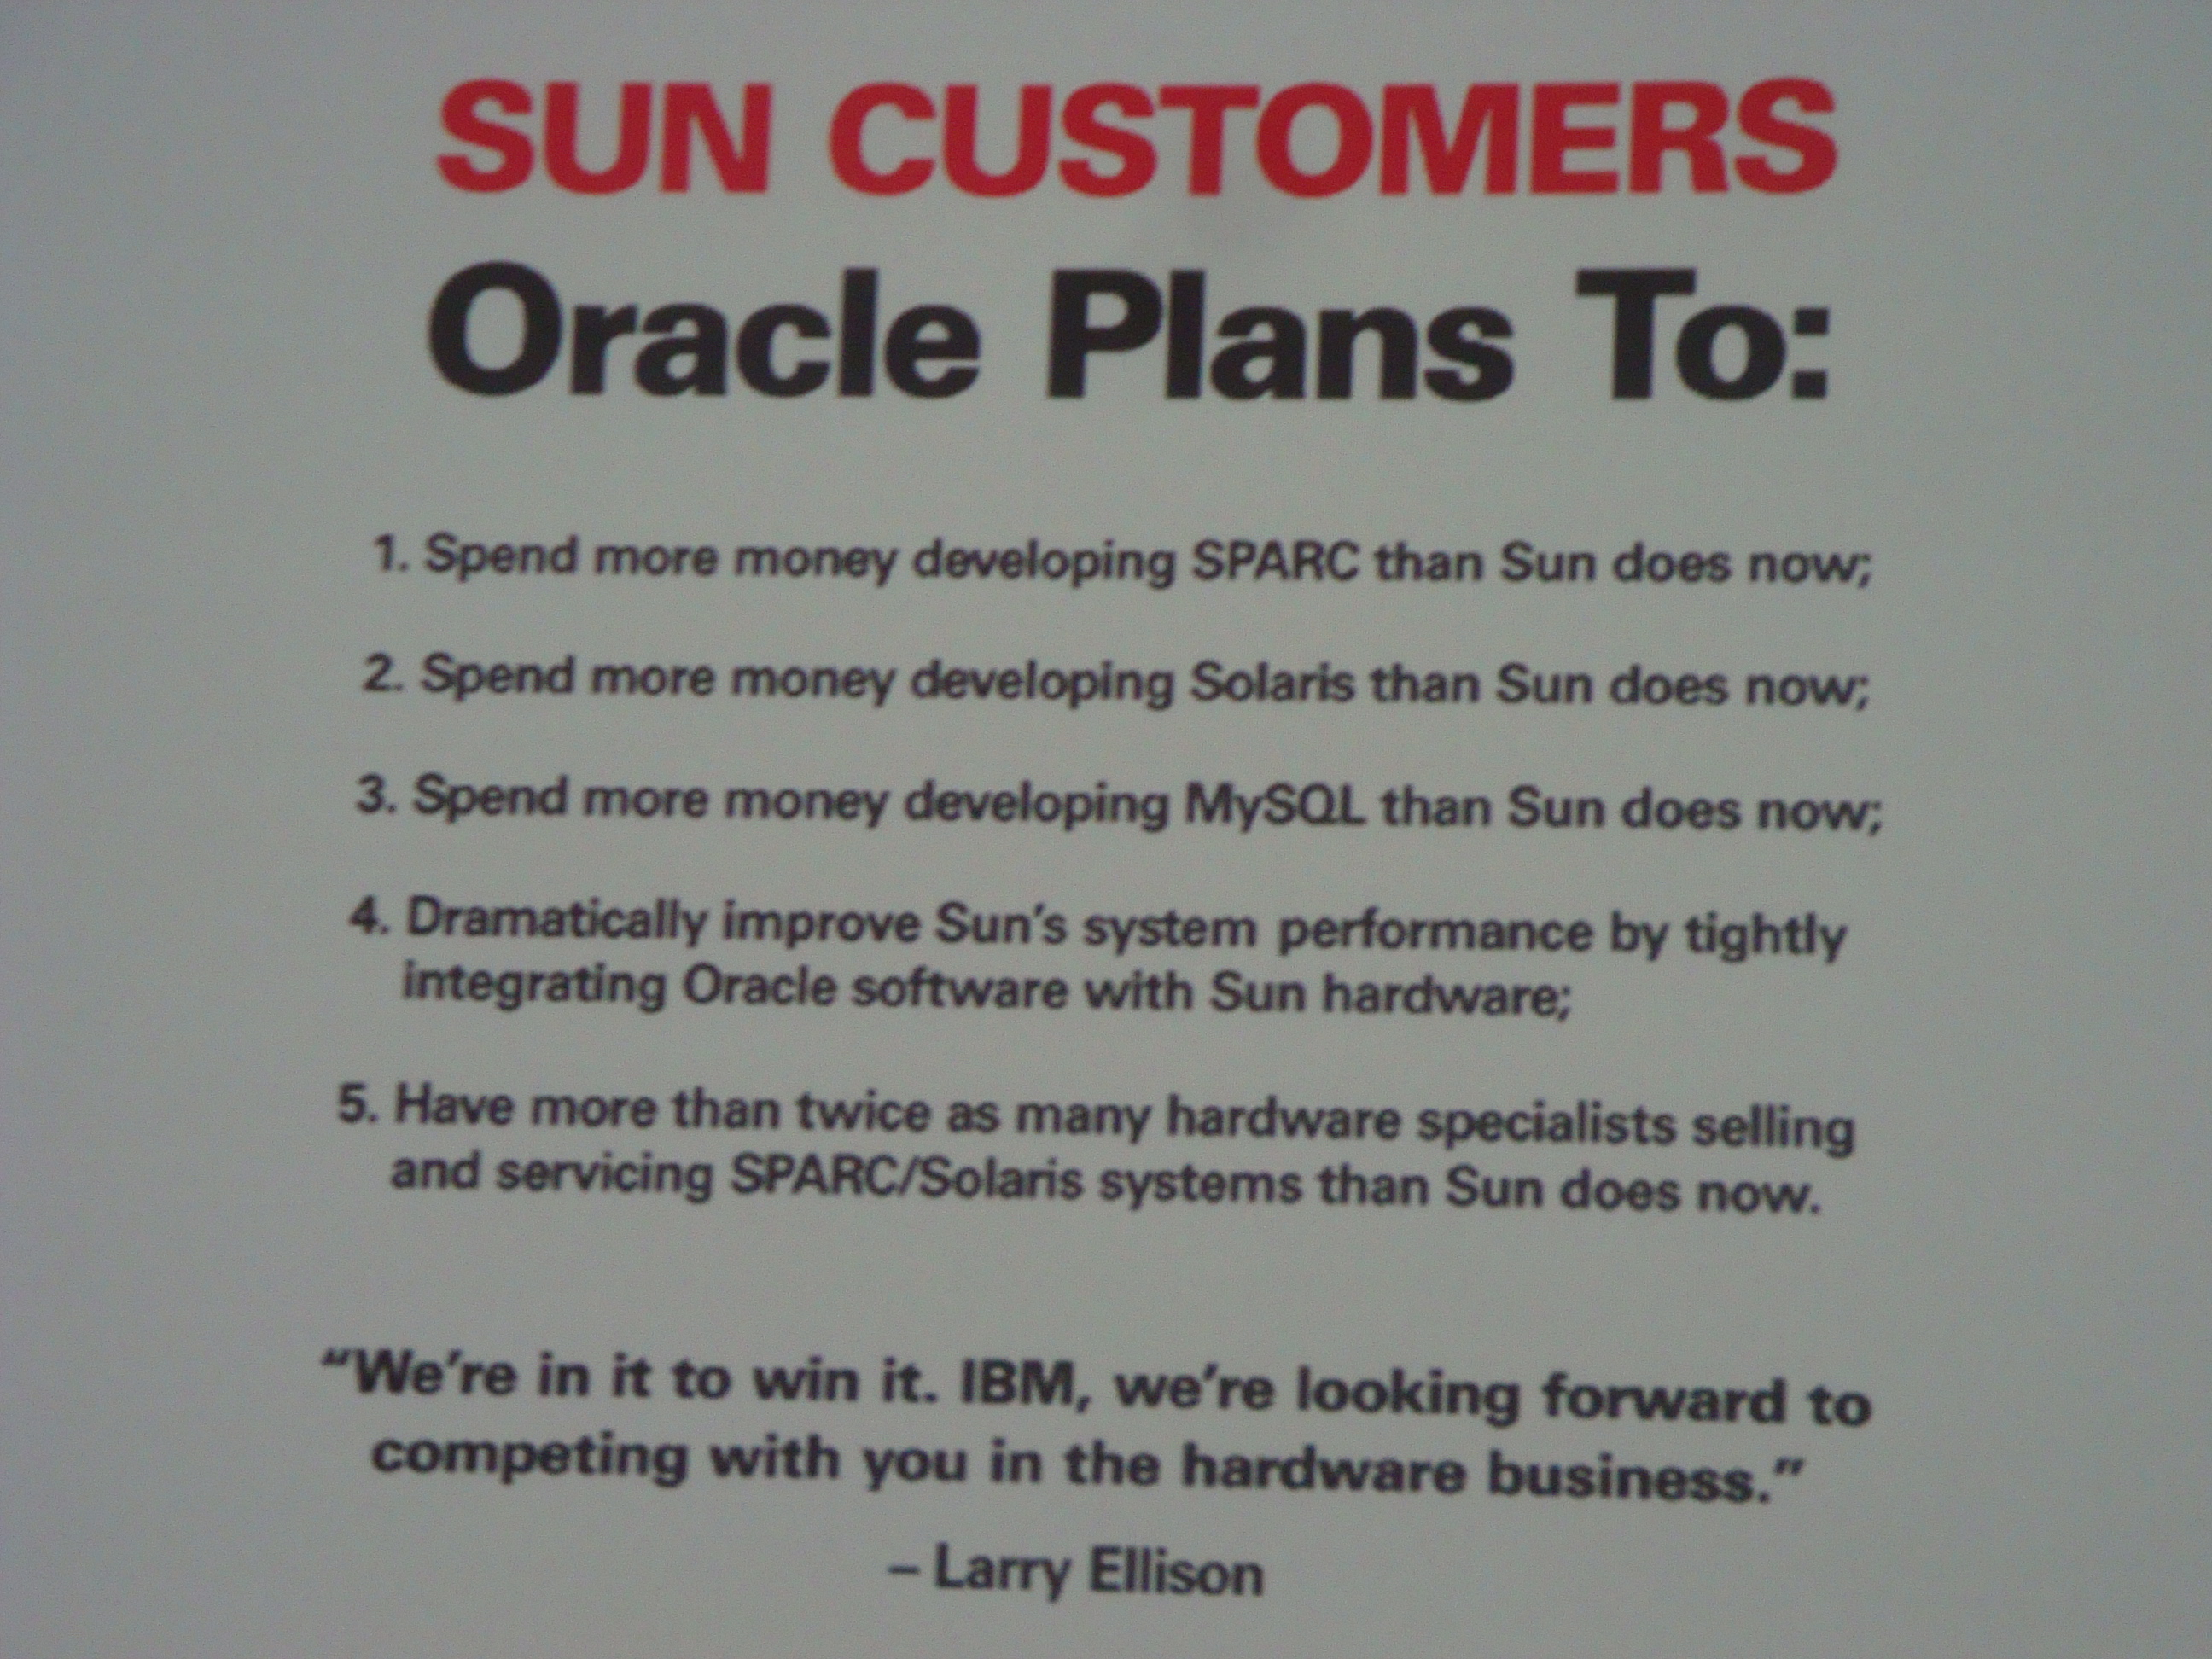 Oracle_Plans_To_Sun_Customers